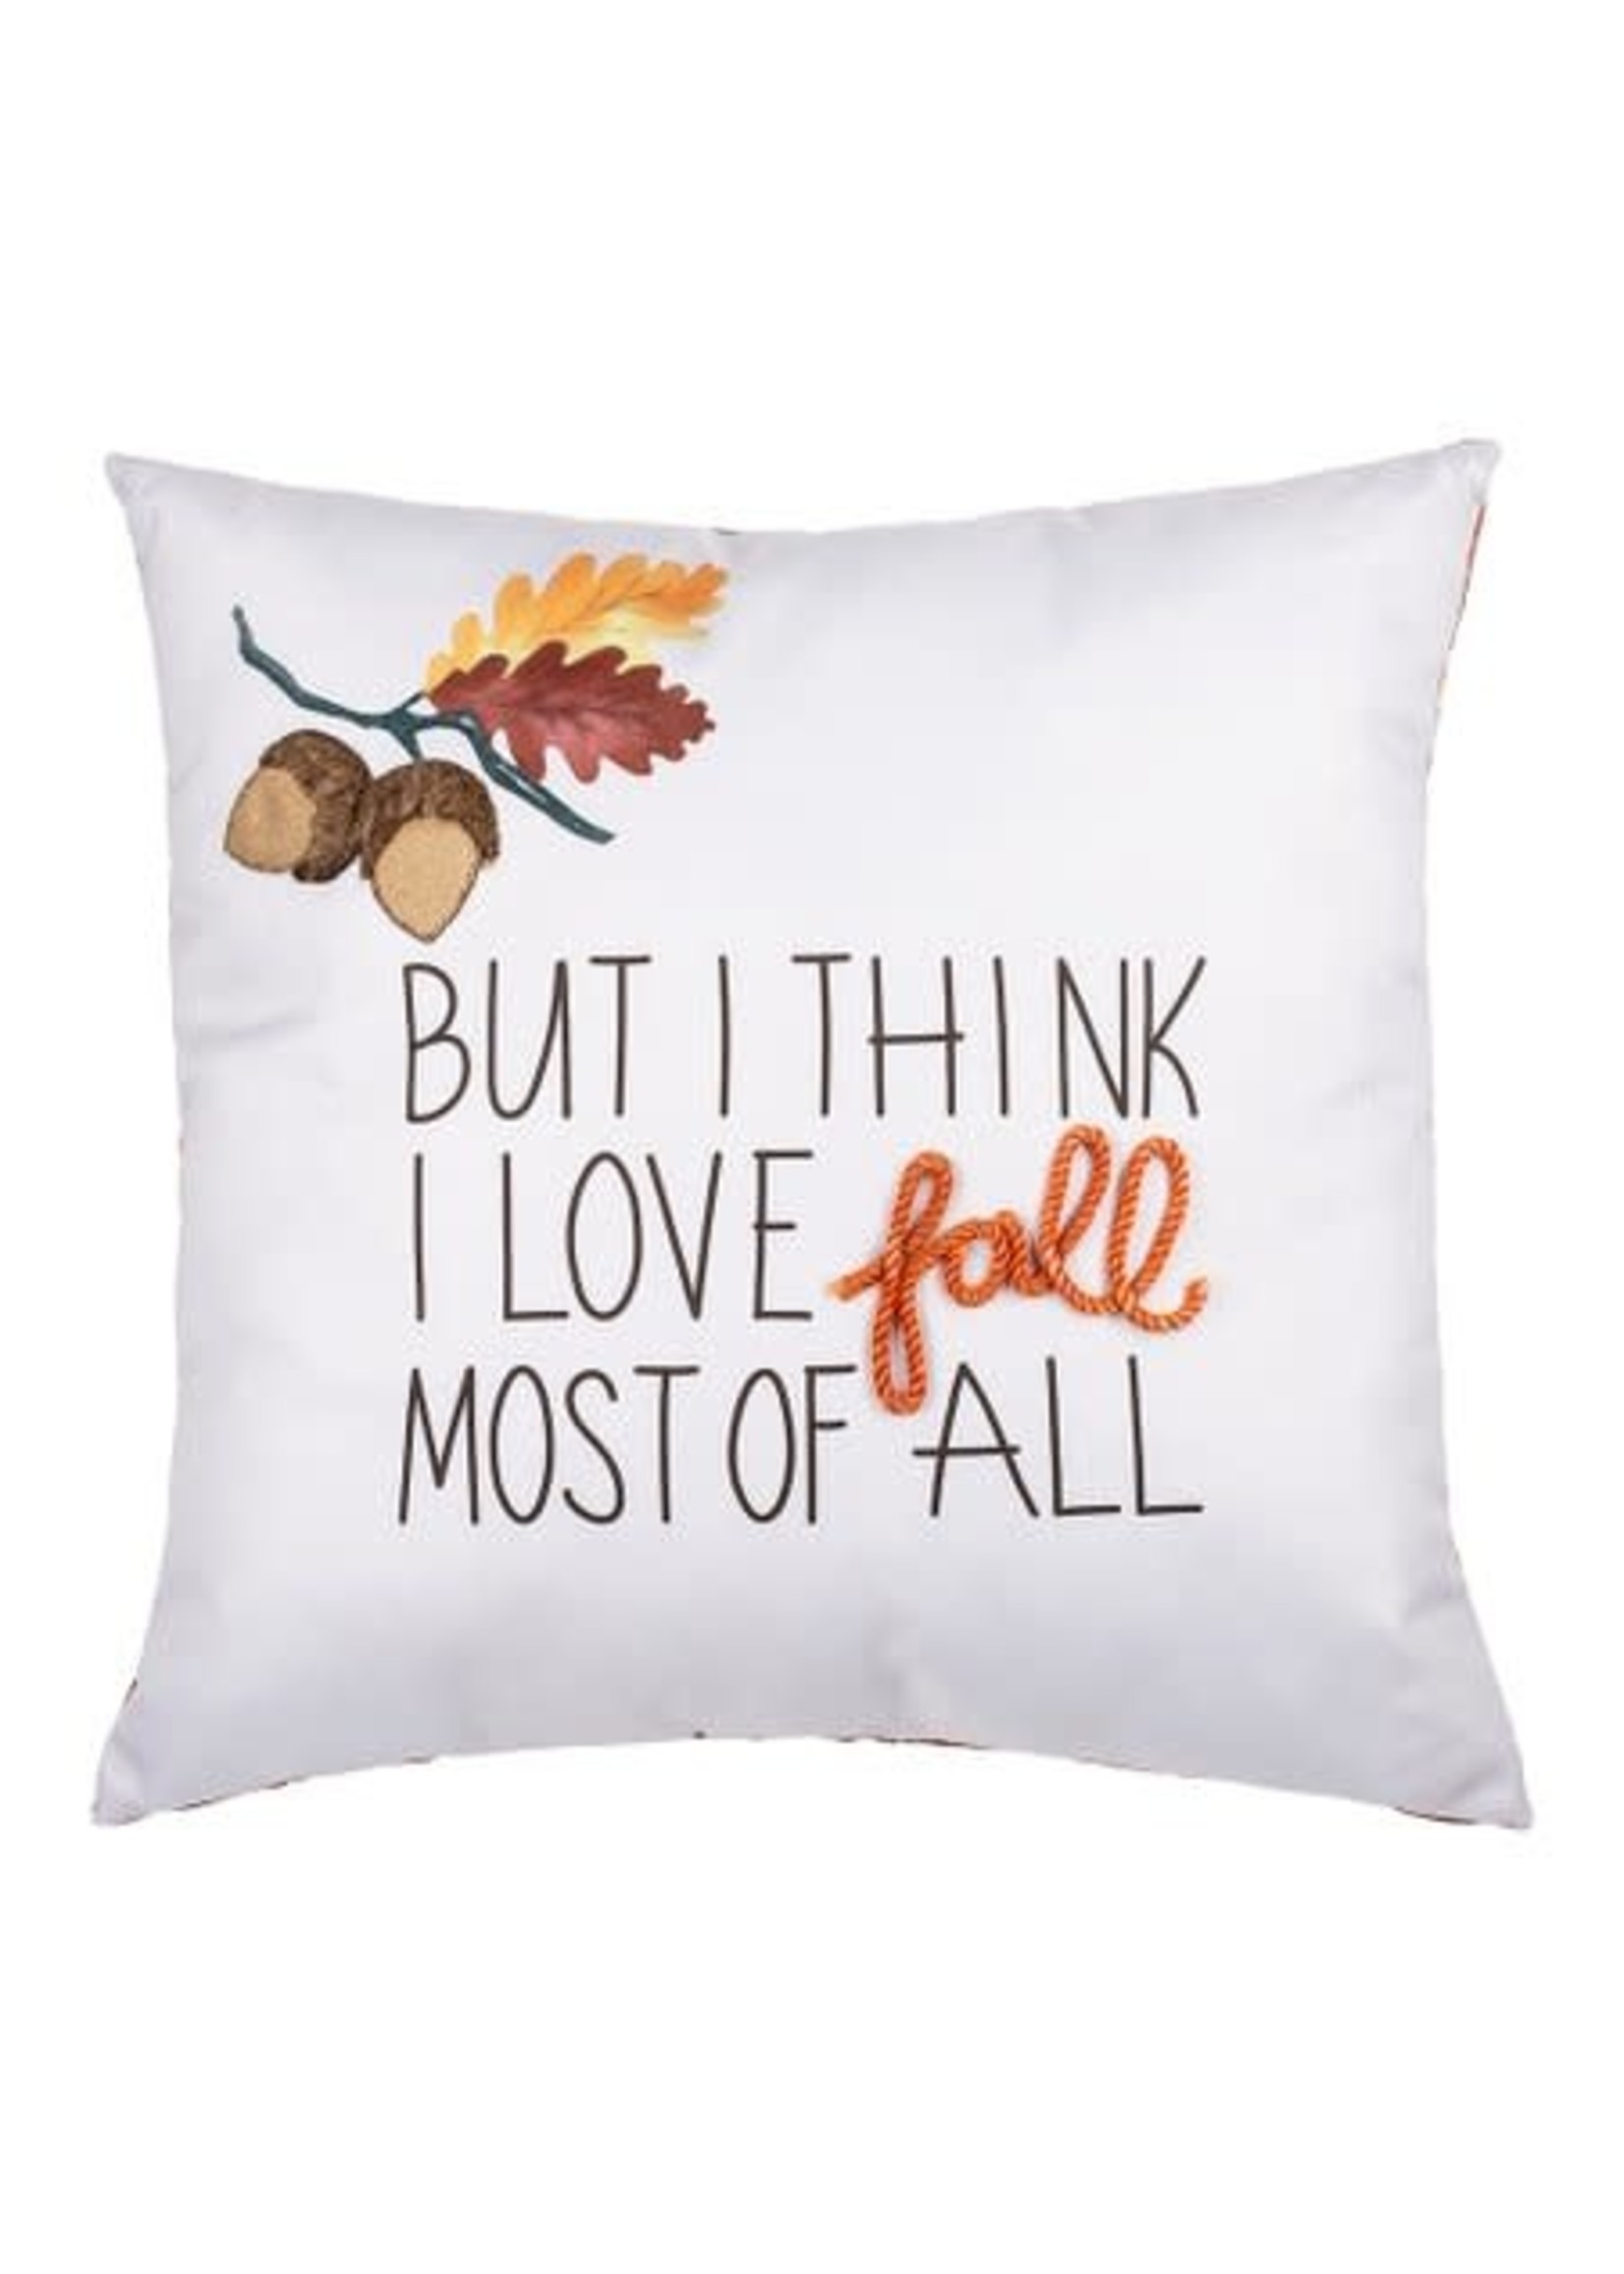 GANZ "BUT I THINK I LOVE FALL MOST OF ALL" ACCENT PILLOW